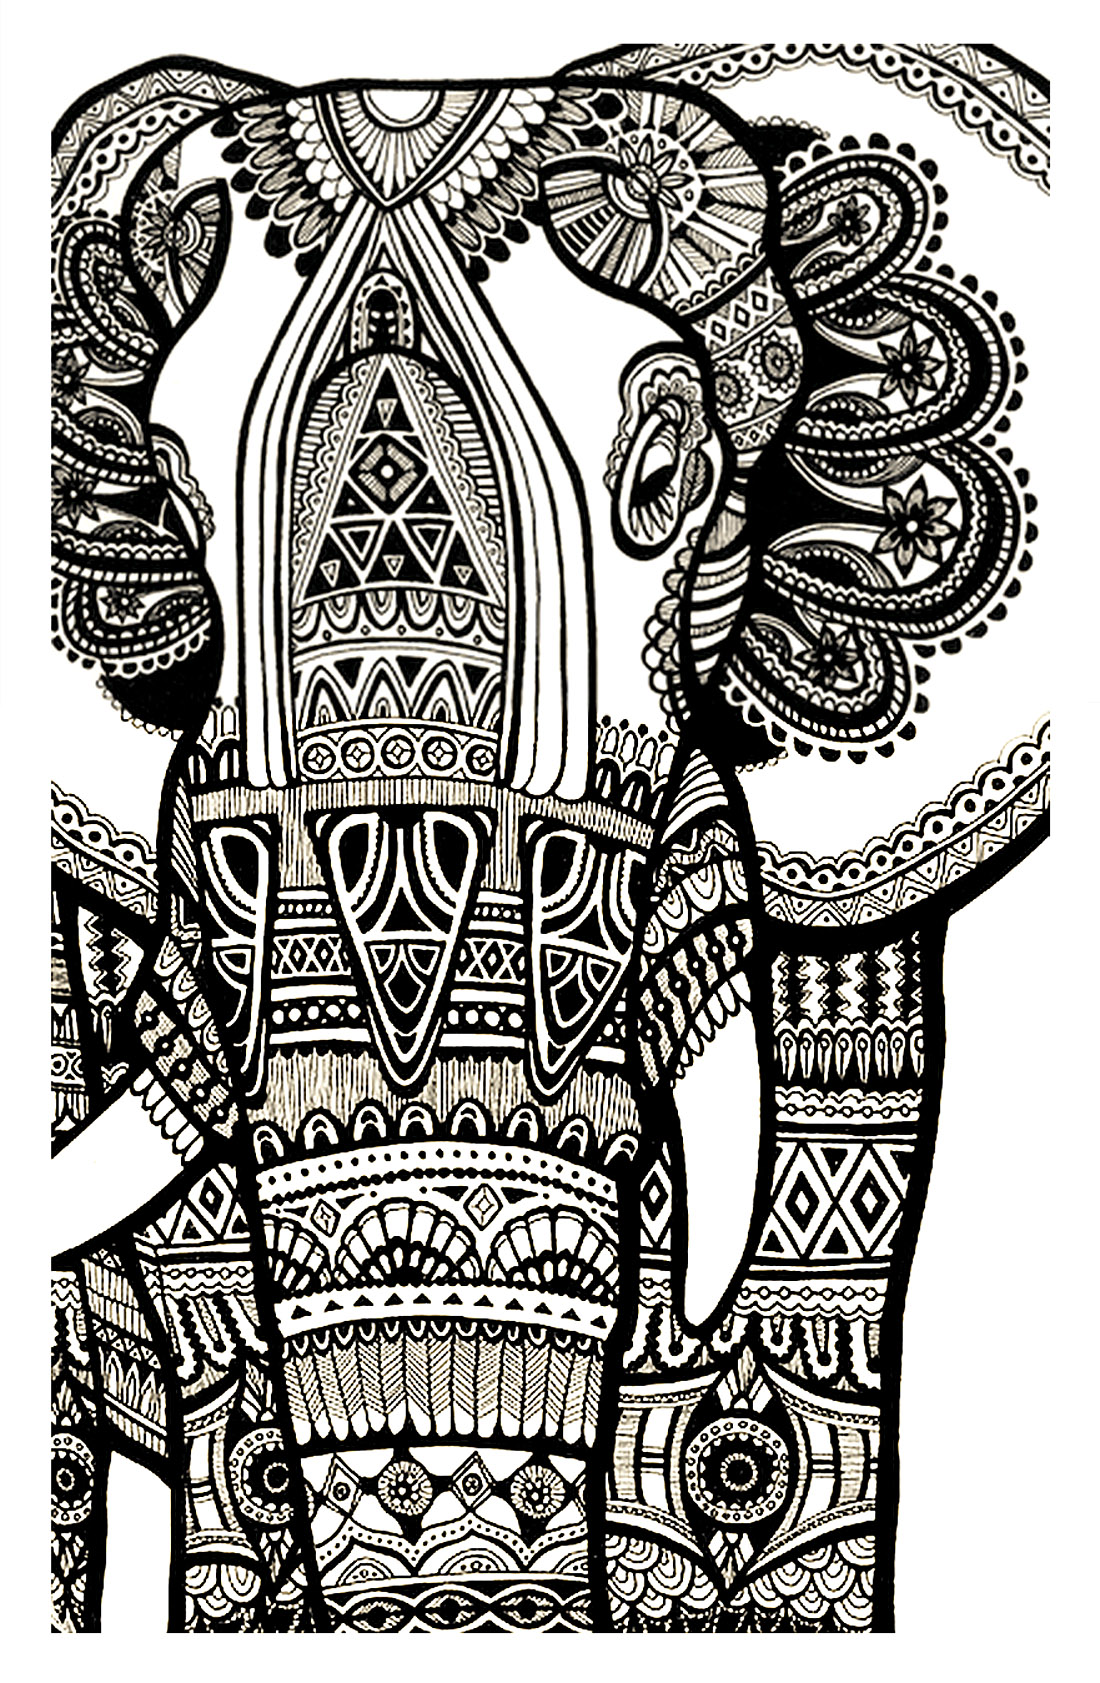 A magnificien elephant drawn with zentangle patterns